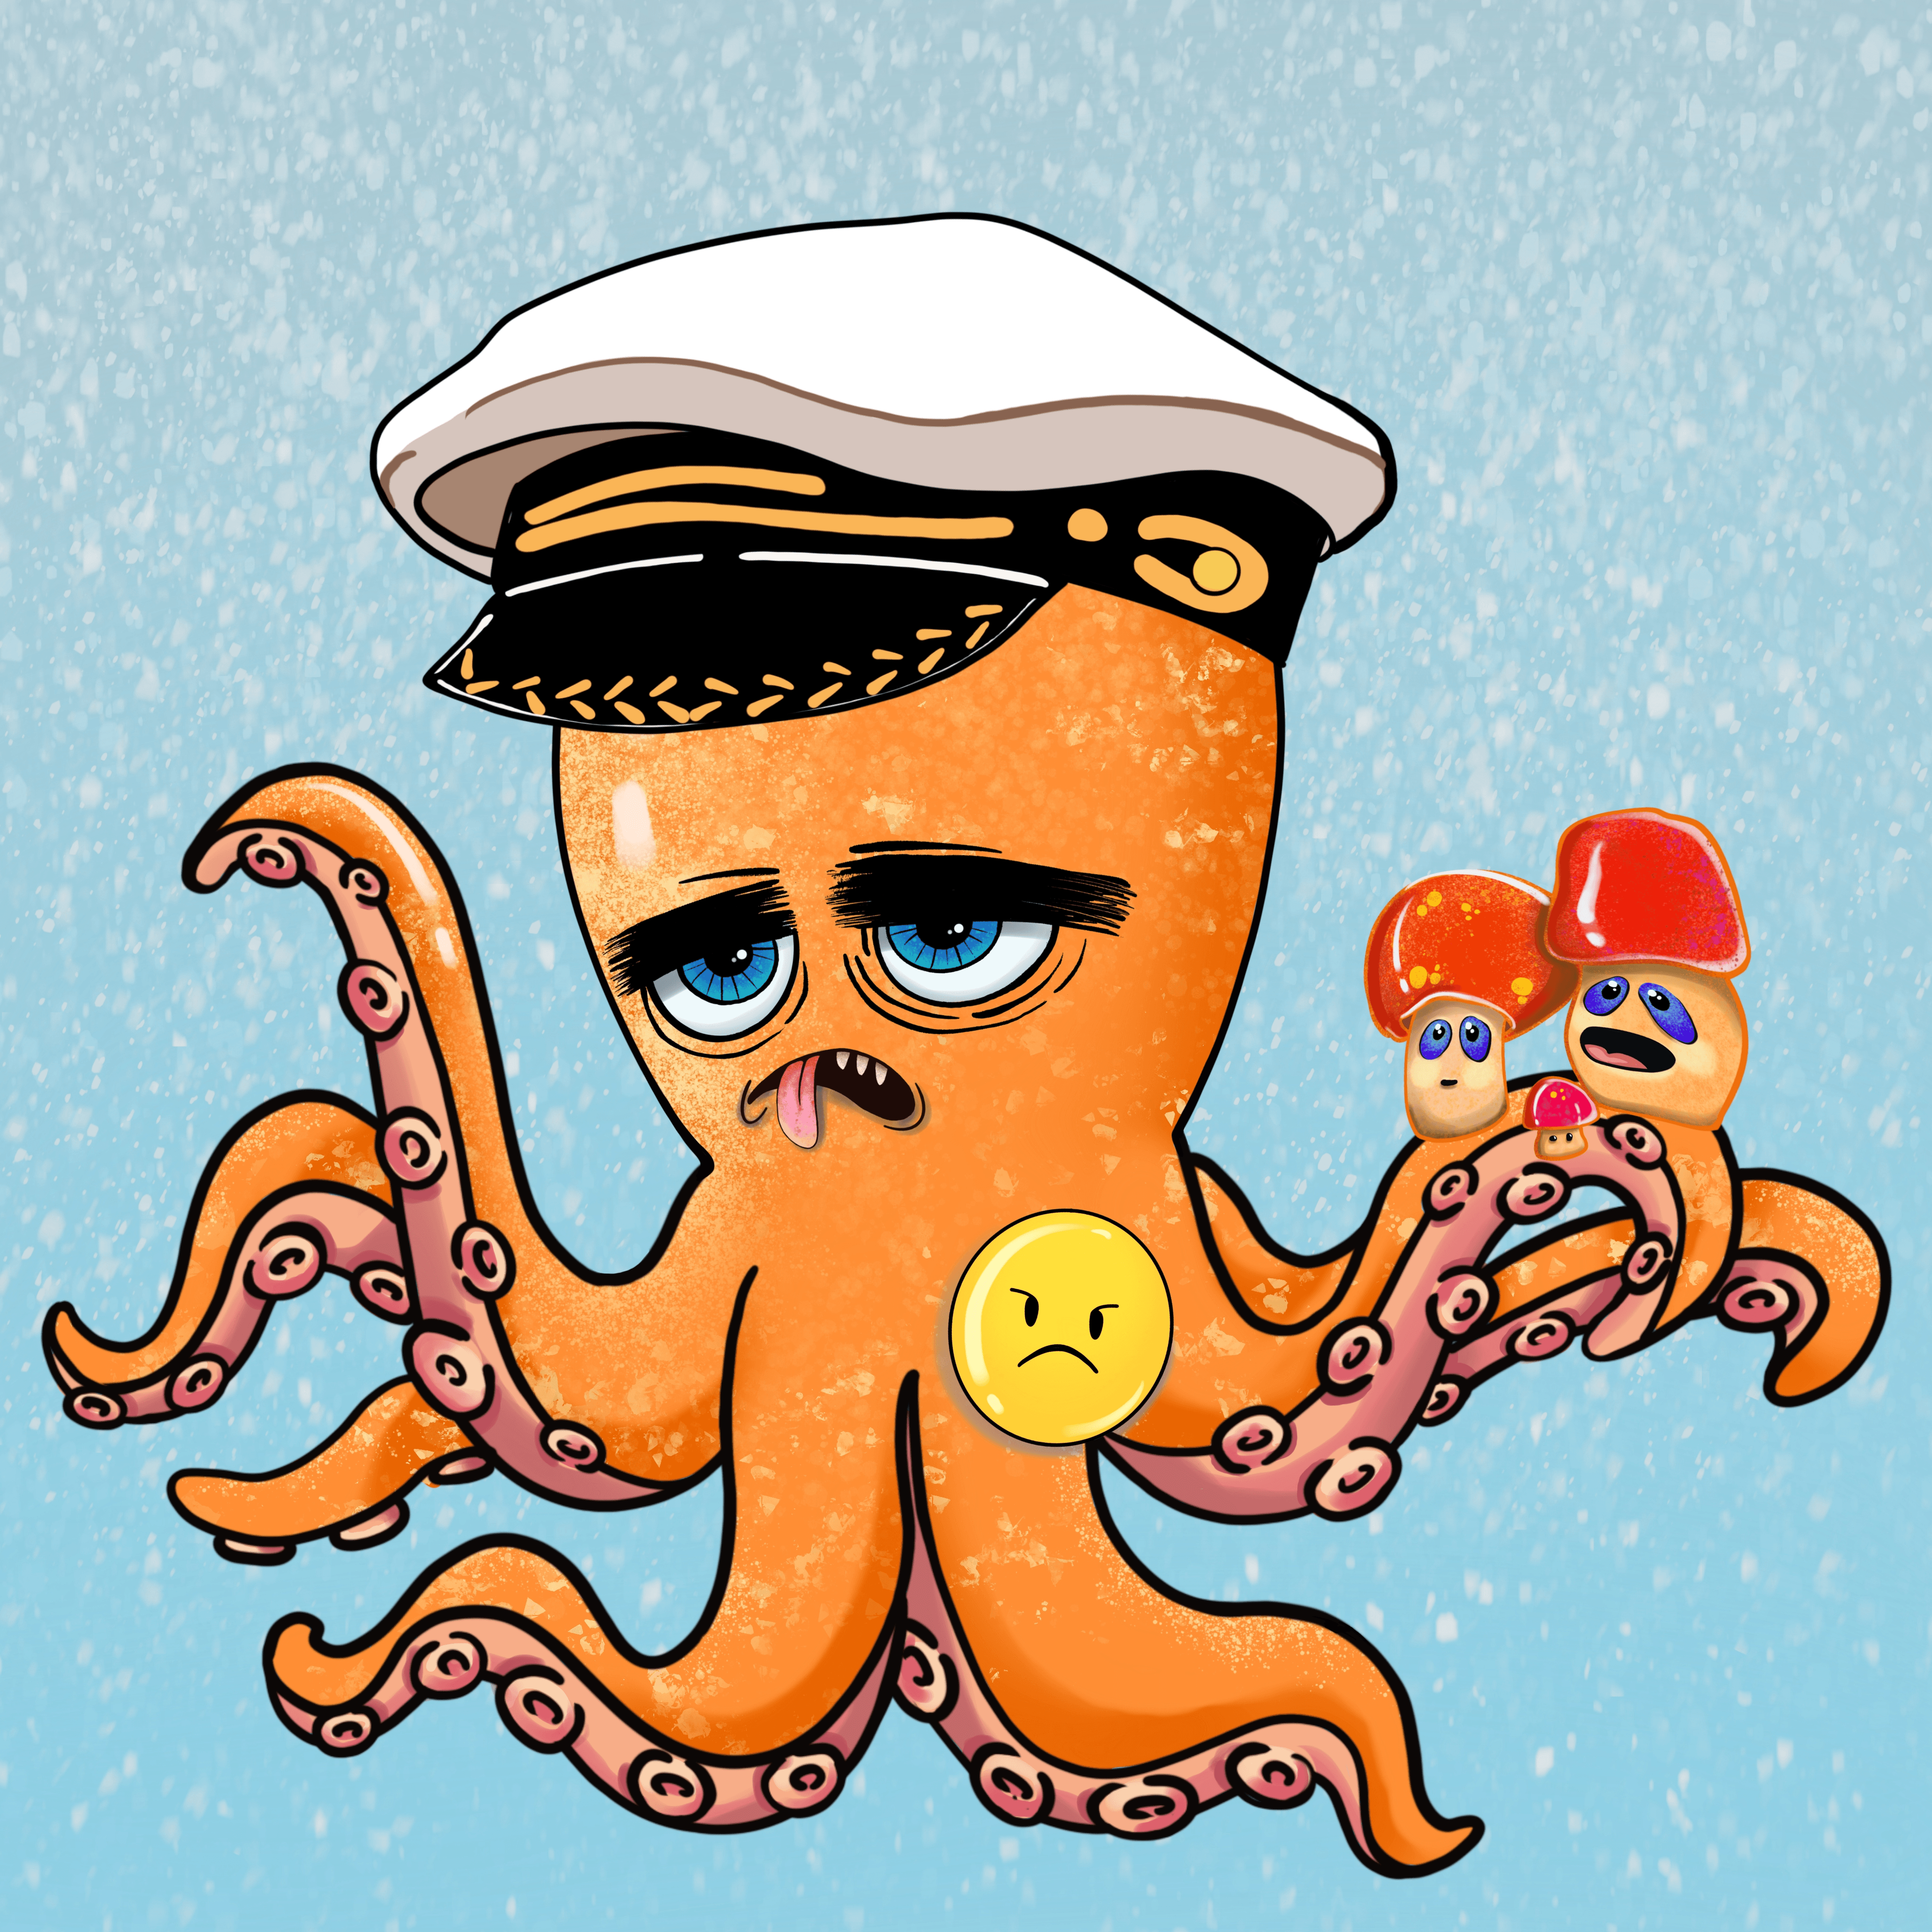 Octodoodle #106